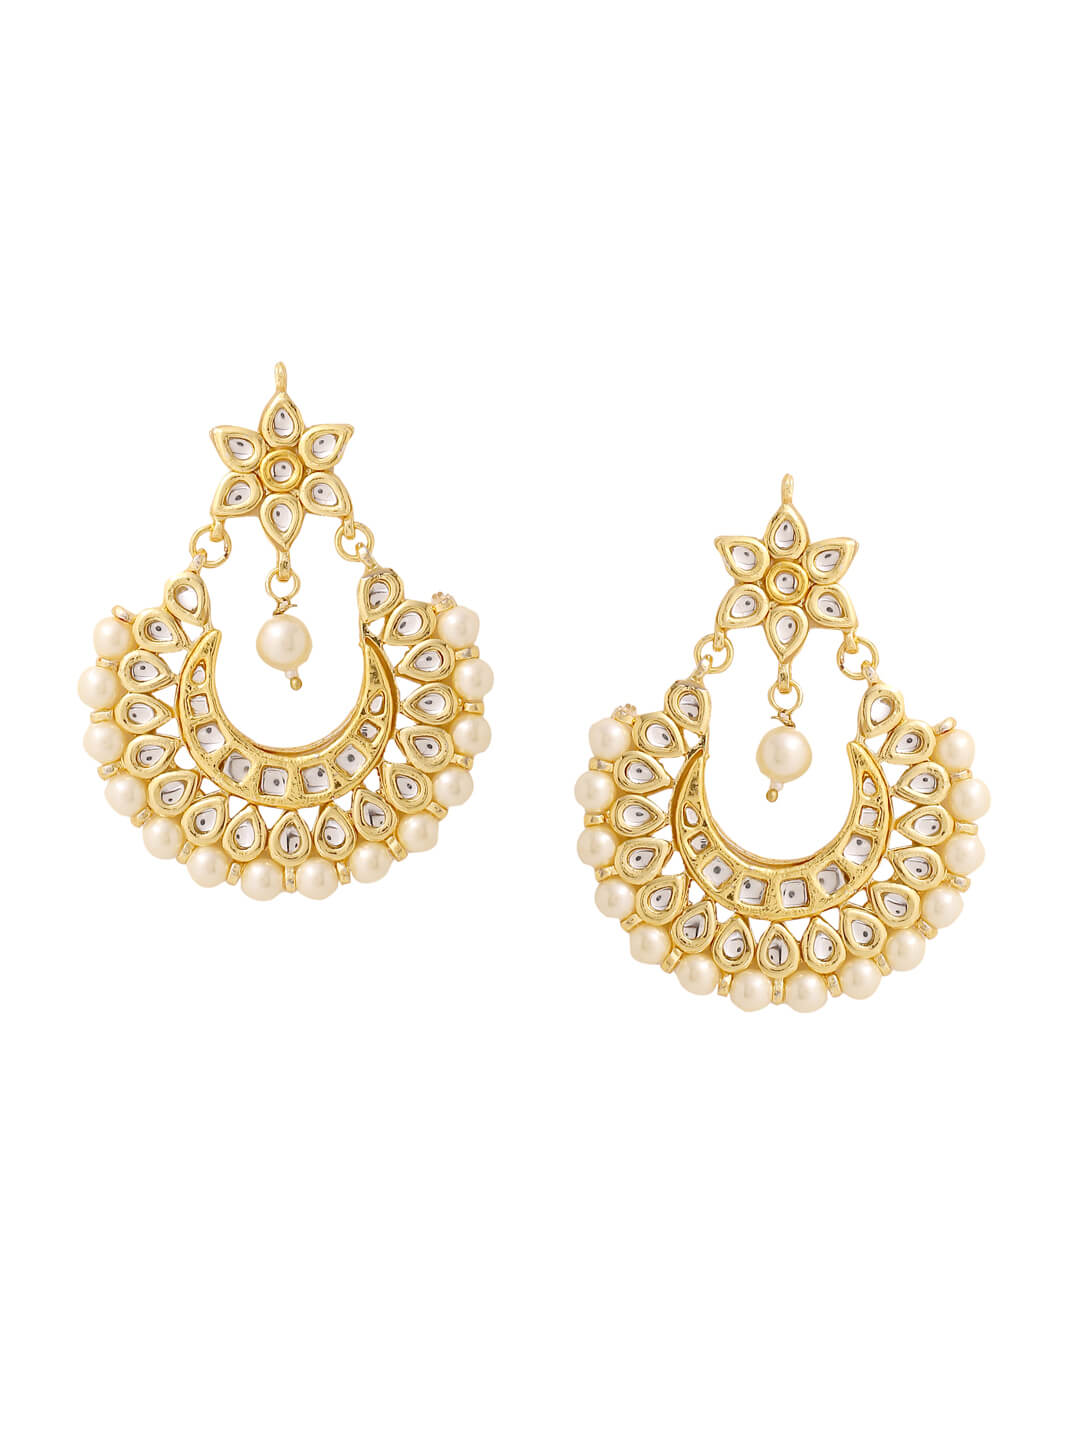 gold-plated-chandbali-earring-with-white-pearls-viraasi